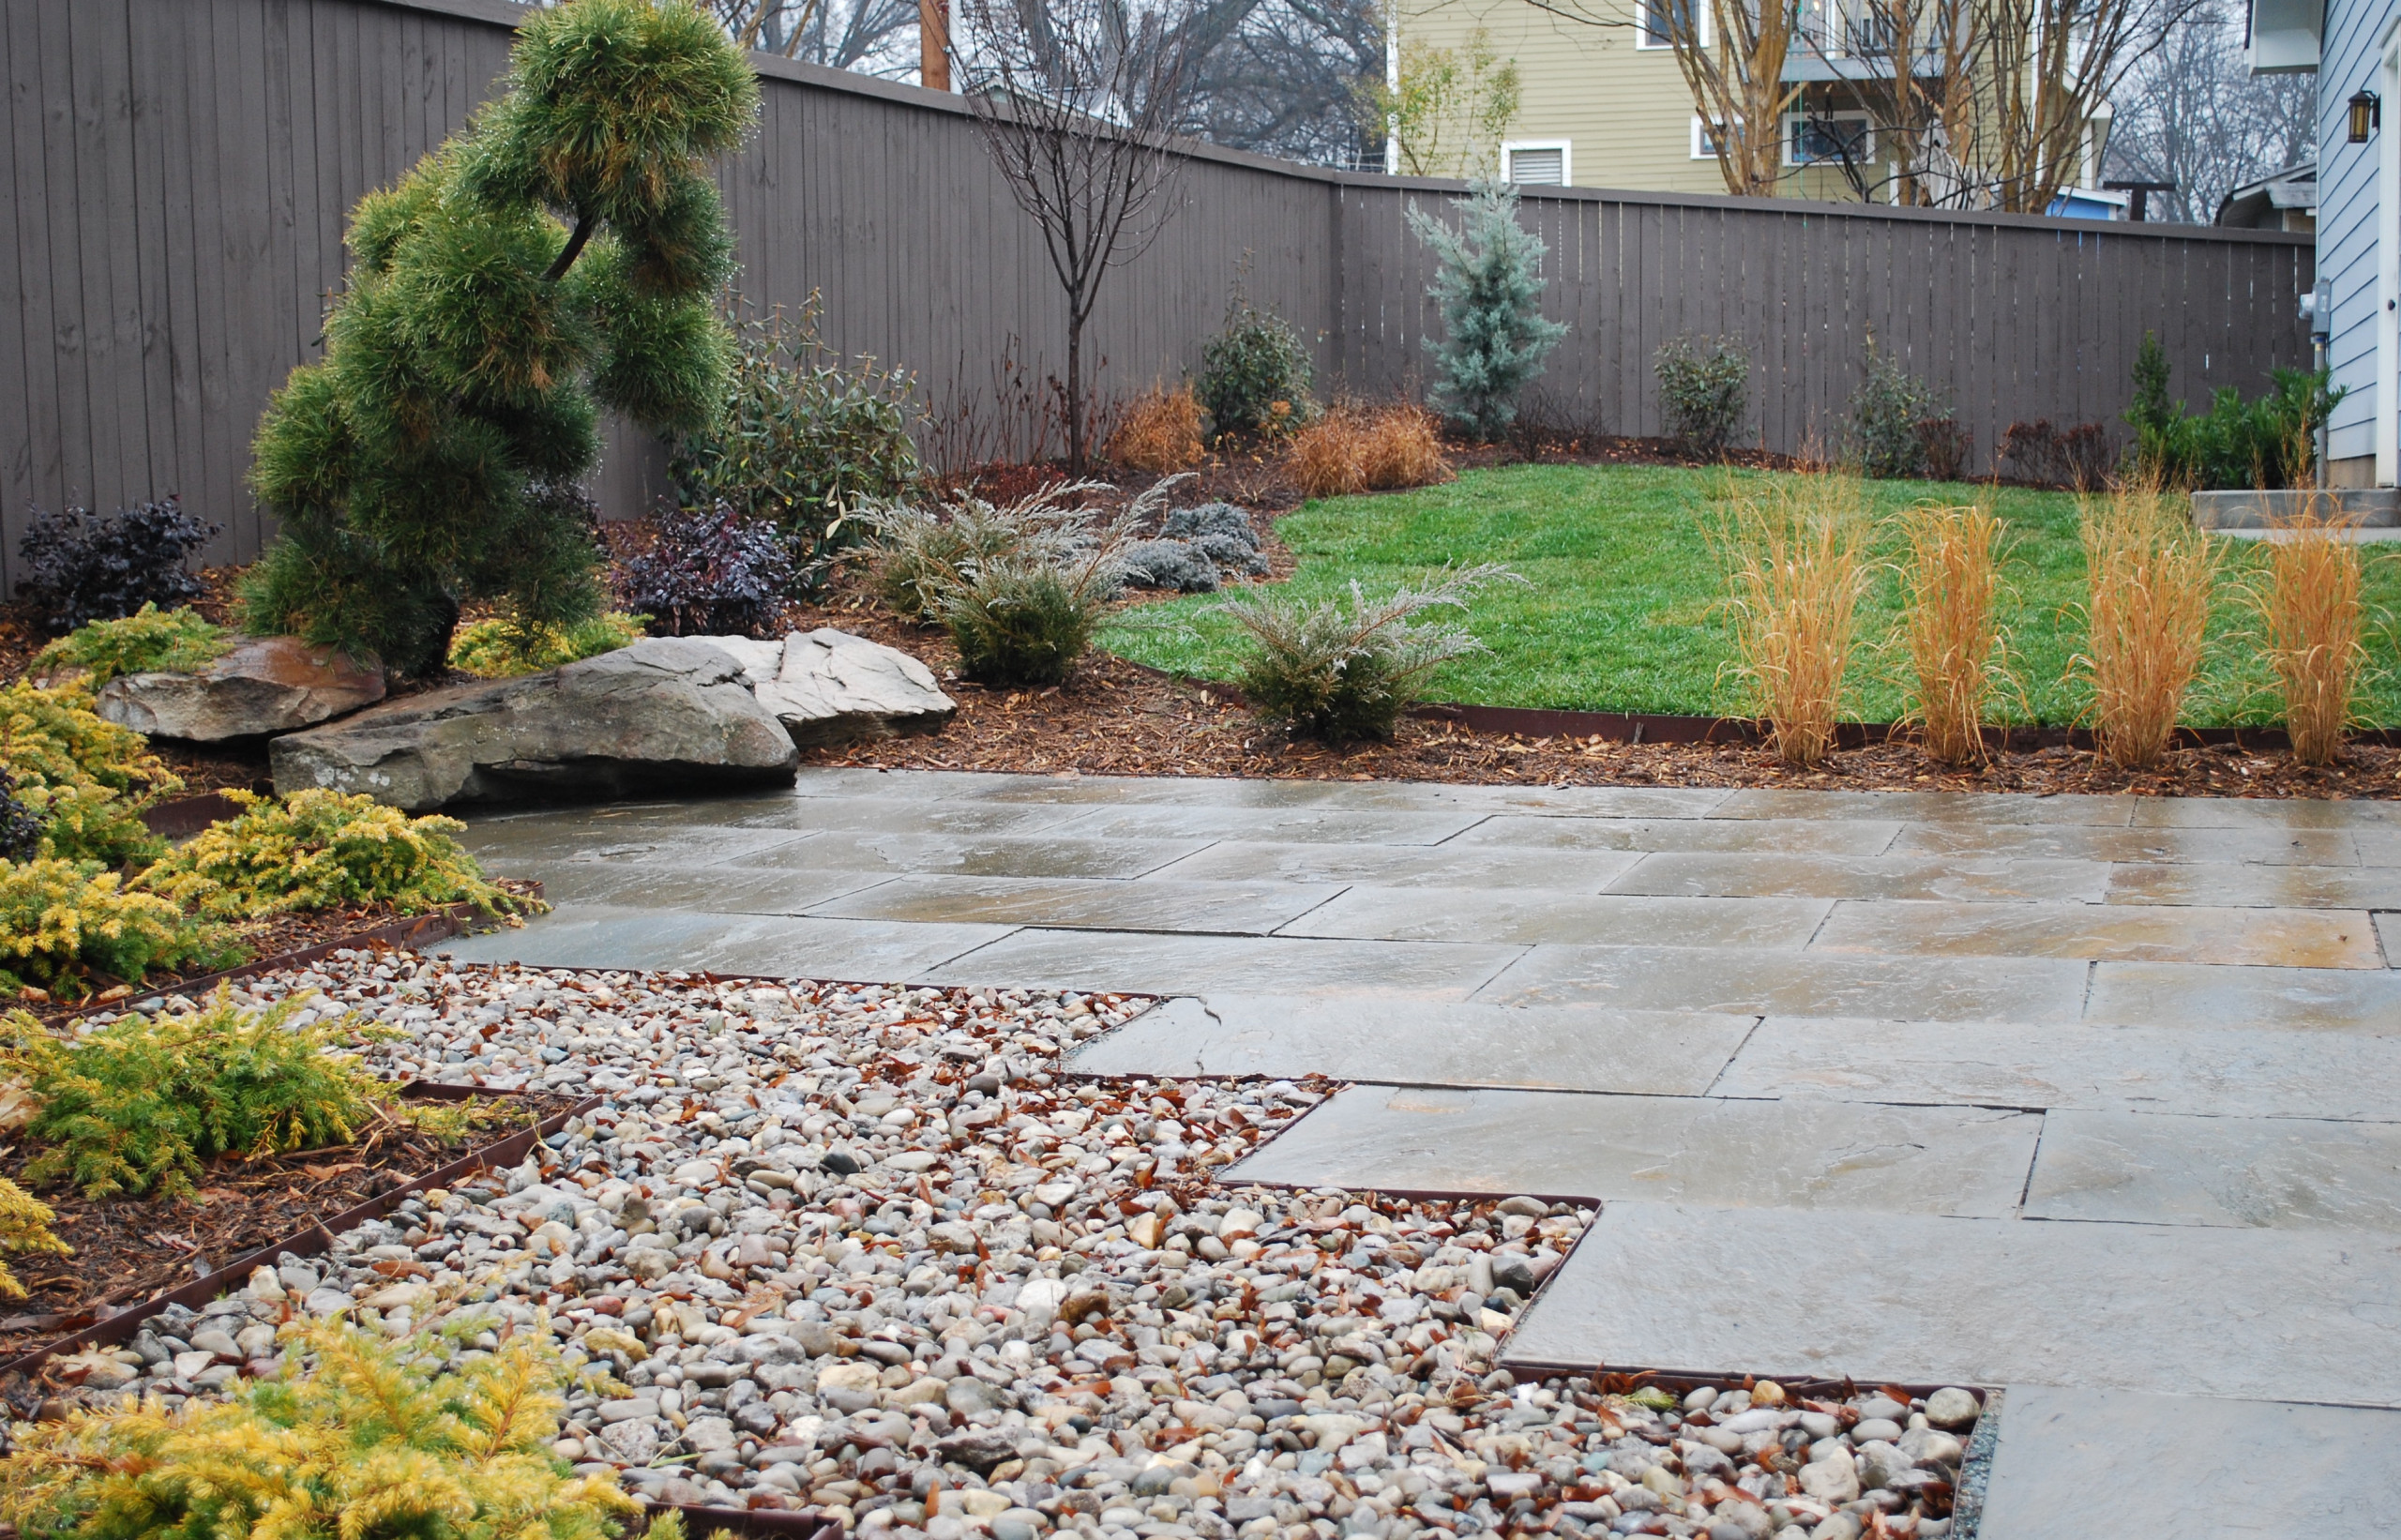 Zigzag patio with cut in boulders.